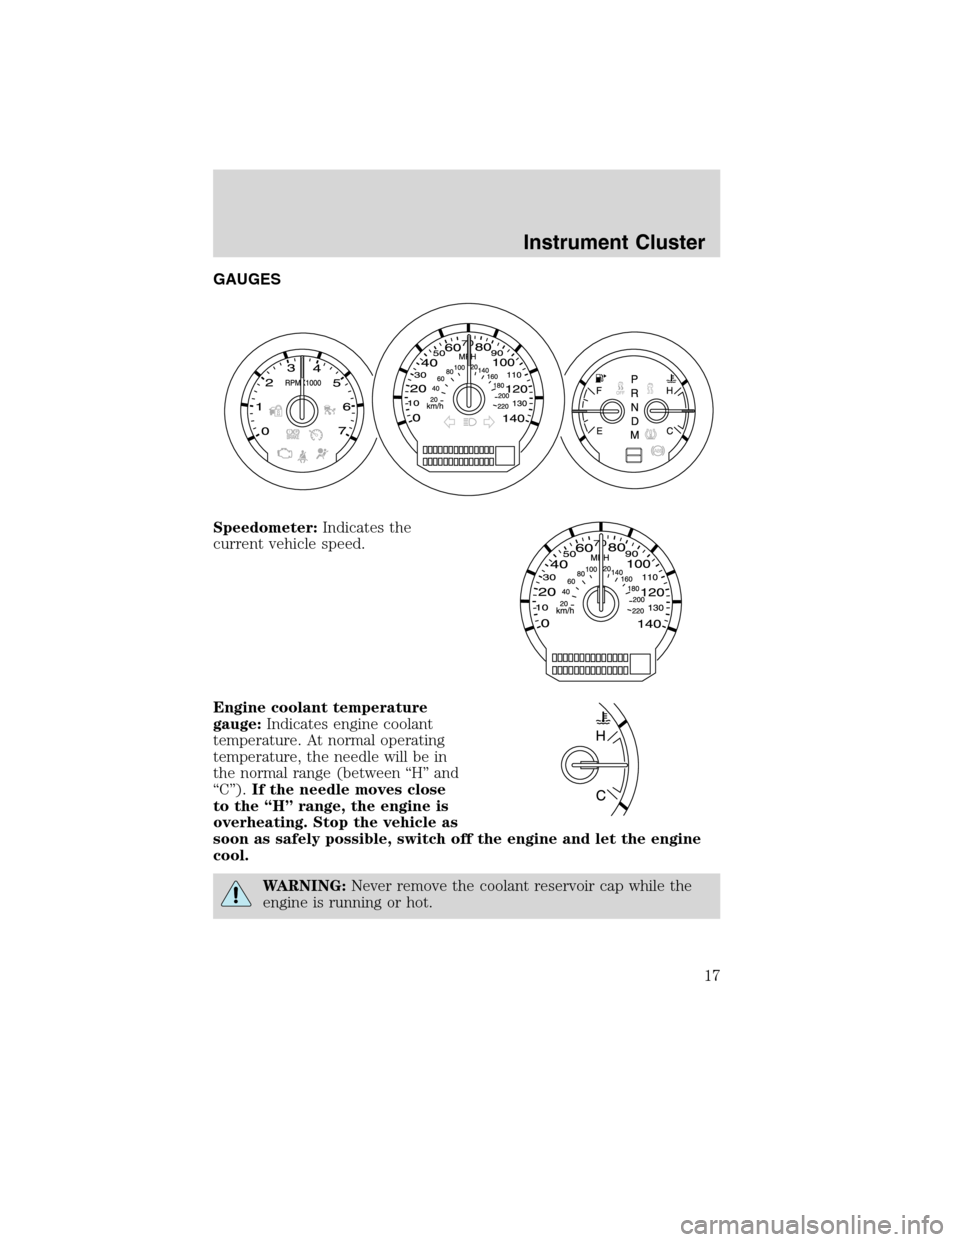 LINCOLN MKS 2010 User Guide GAUGES
Speedometer:Indicates the
current vehicle speed.
Engine coolant temperature
gauge:Indicates engine coolant
temperature. At normal operating
temperature, the needle will be in
the normal range (